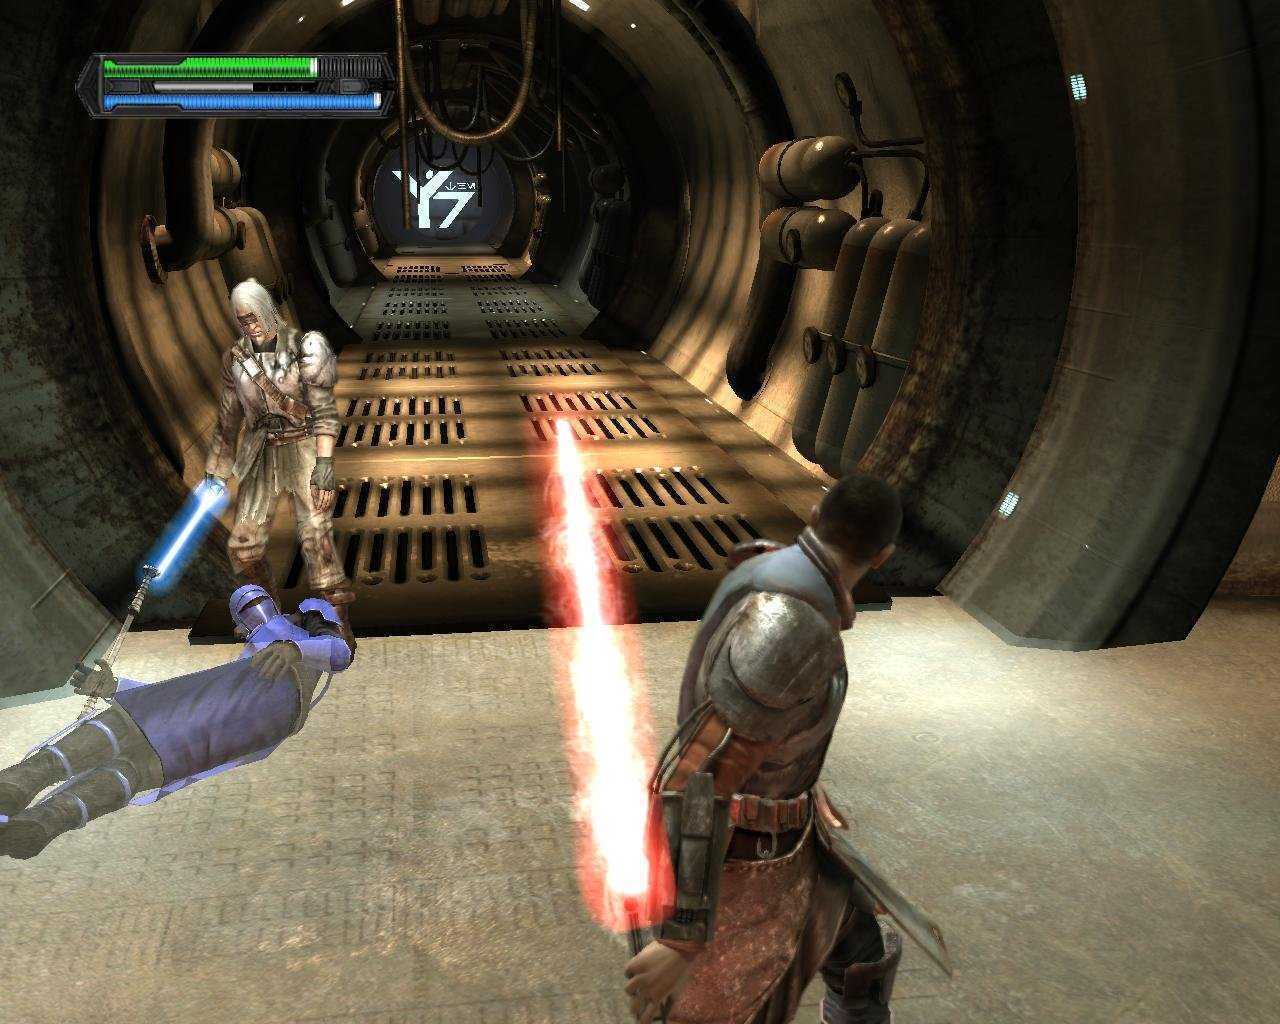 Включи звездные игры. Star Wars the Force unleashed Ultimate Sith Edition (2009). Стар ВАРС the Force unleashed 1. Игра Star Wars: the Force unleashed II. Star Wars: the Force unleashed - Ultimate Sith Edition.